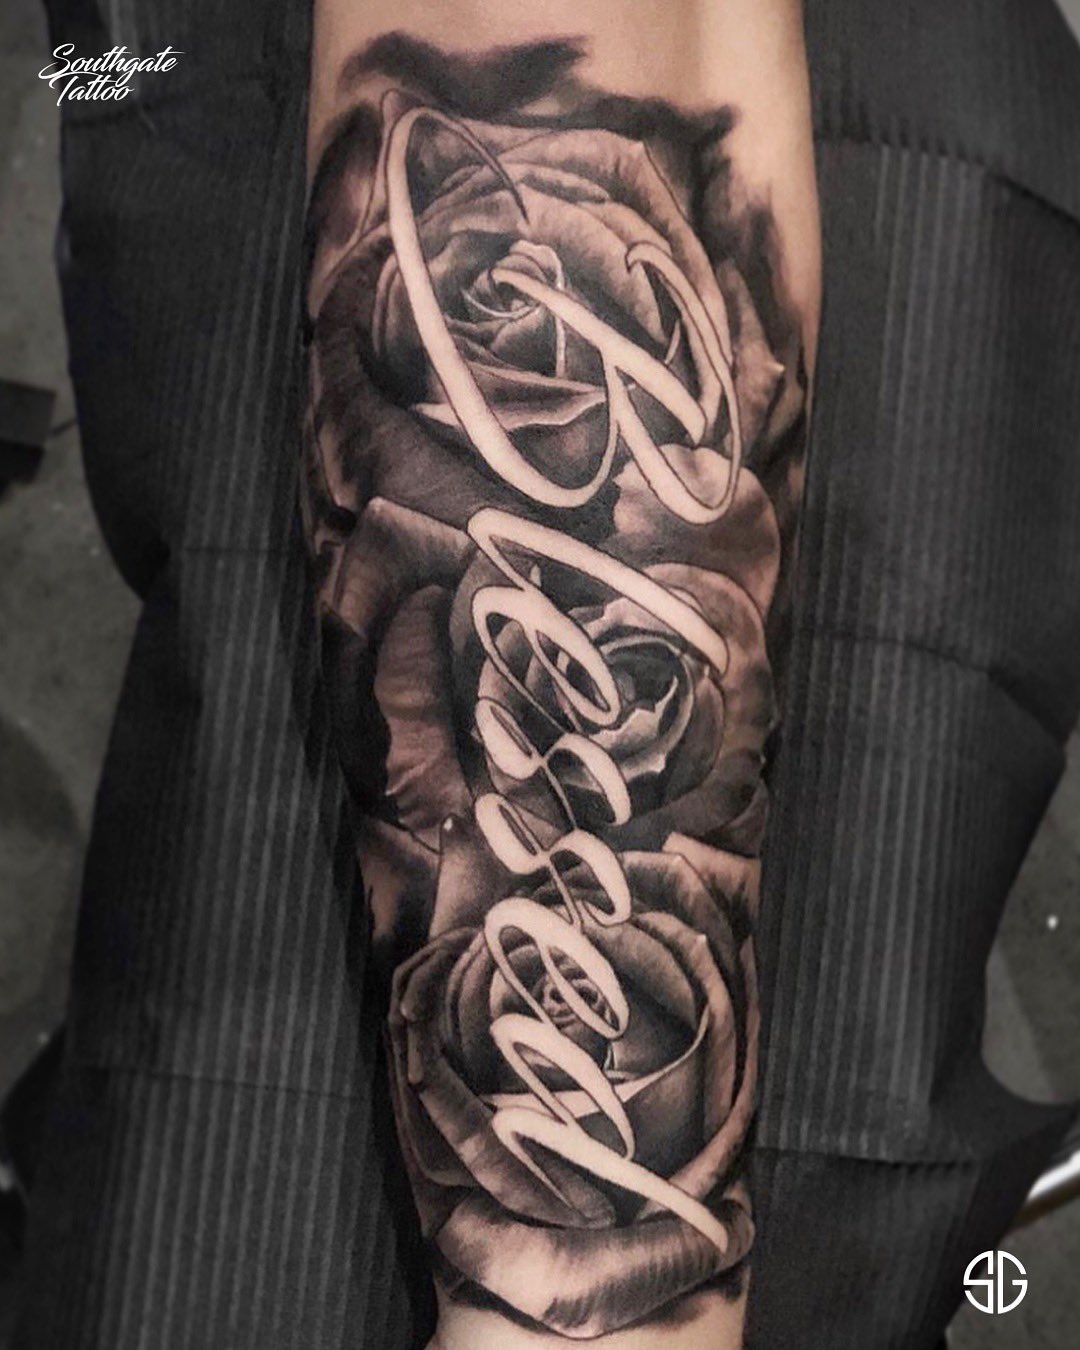 Blessed outer forearm tattoo  Patriarch Tattoo Company  Facebook